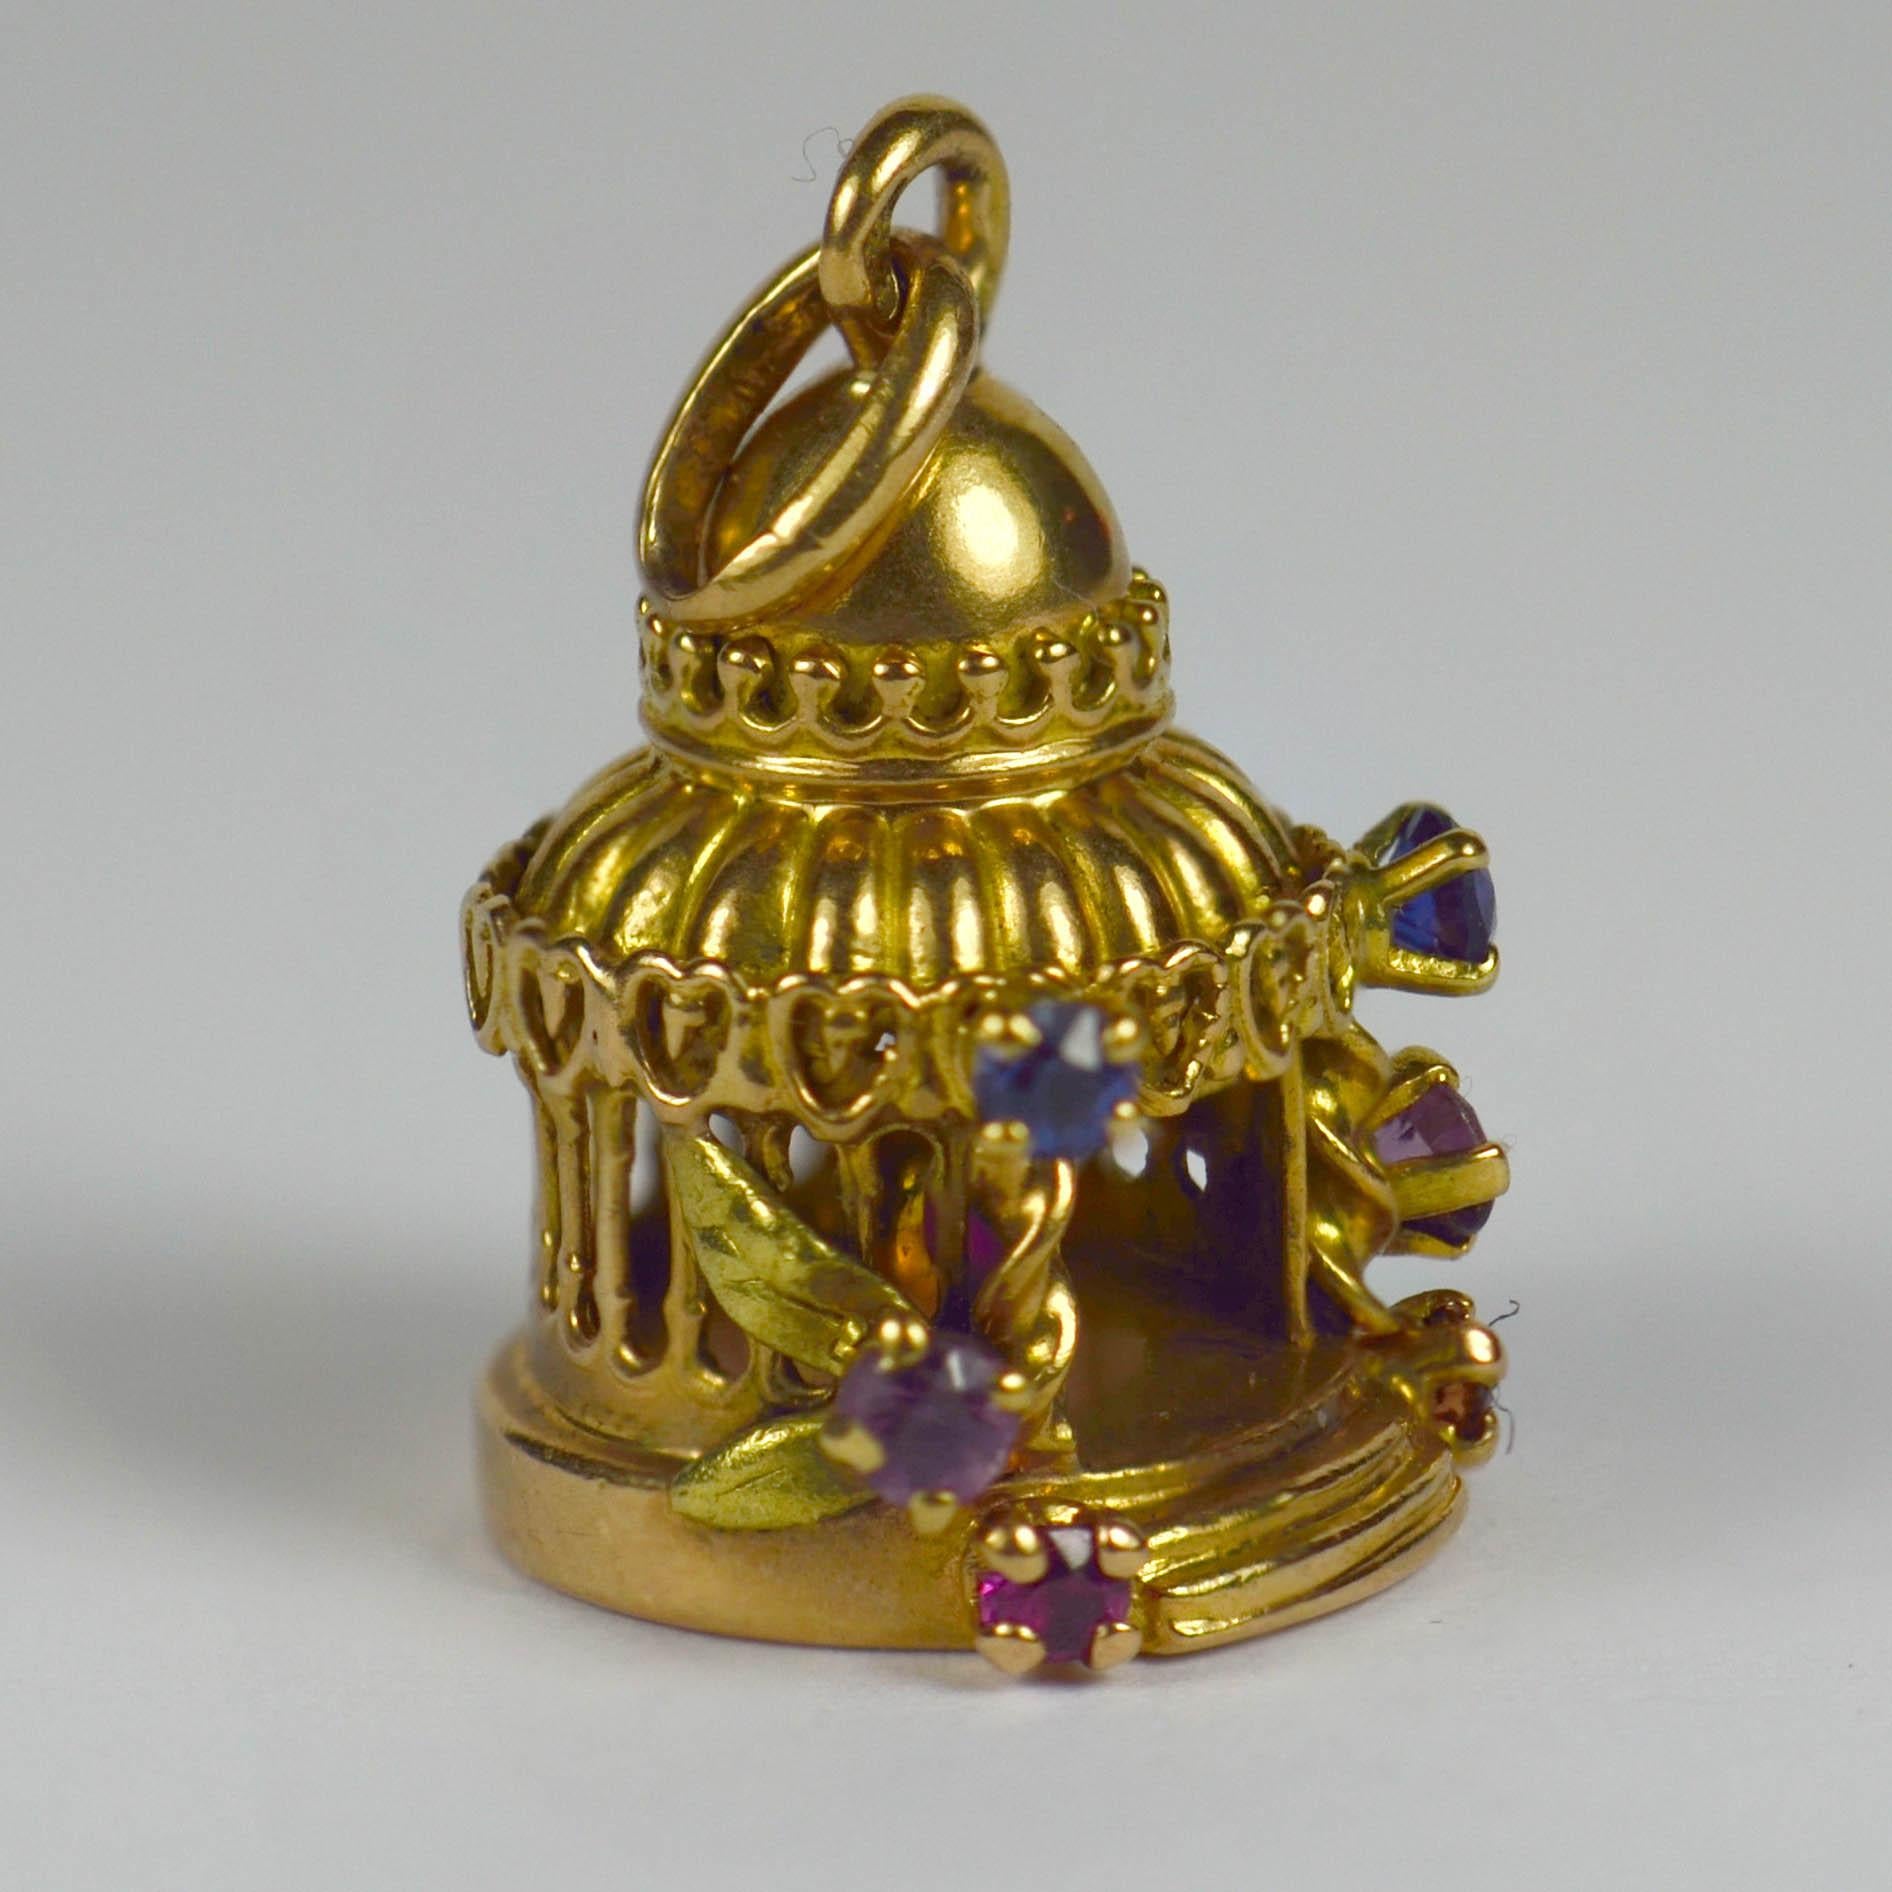 A French 18 karat yellow gold gem set charm pendant designed as a lovers pavilion or temple, with a red love heart set inside. Surrounded by climbing vines and flowers in multi coloured paste. Stamped with the eagle's head for French manufacture and